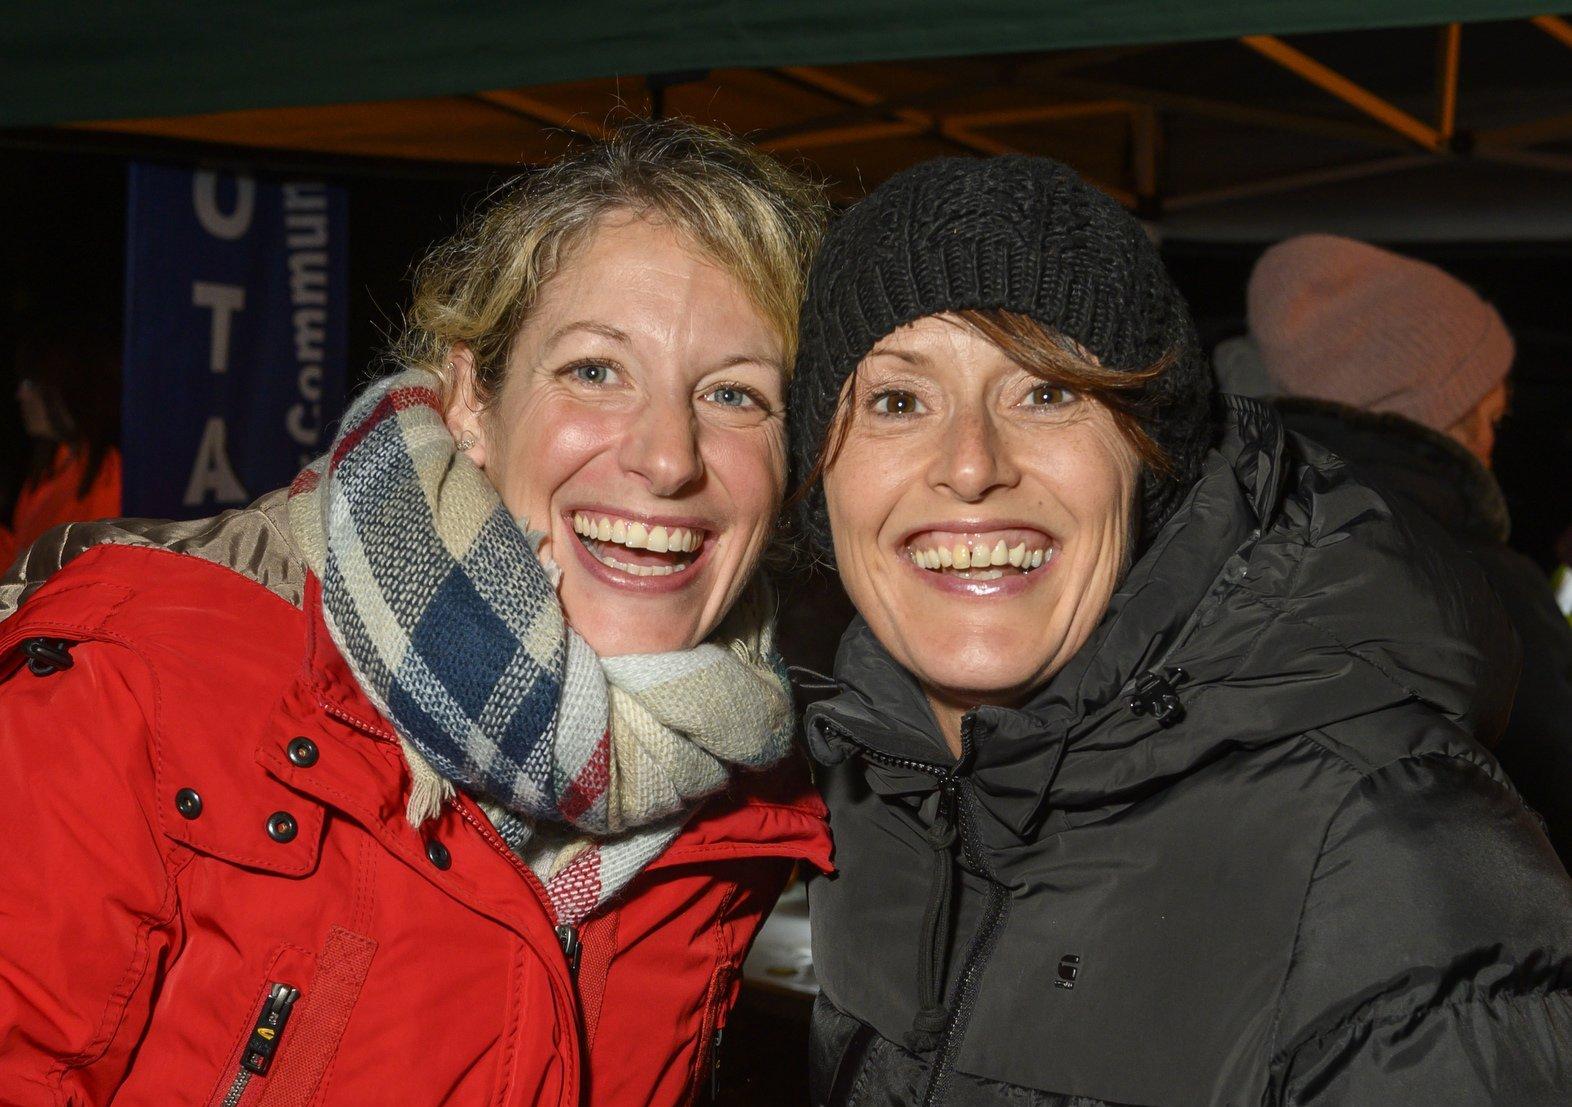 Lauder fireworks display 2019

Alison Hennessey with Jude Wilkinson

Pic Phil Wilkinson 
info@philspix.com